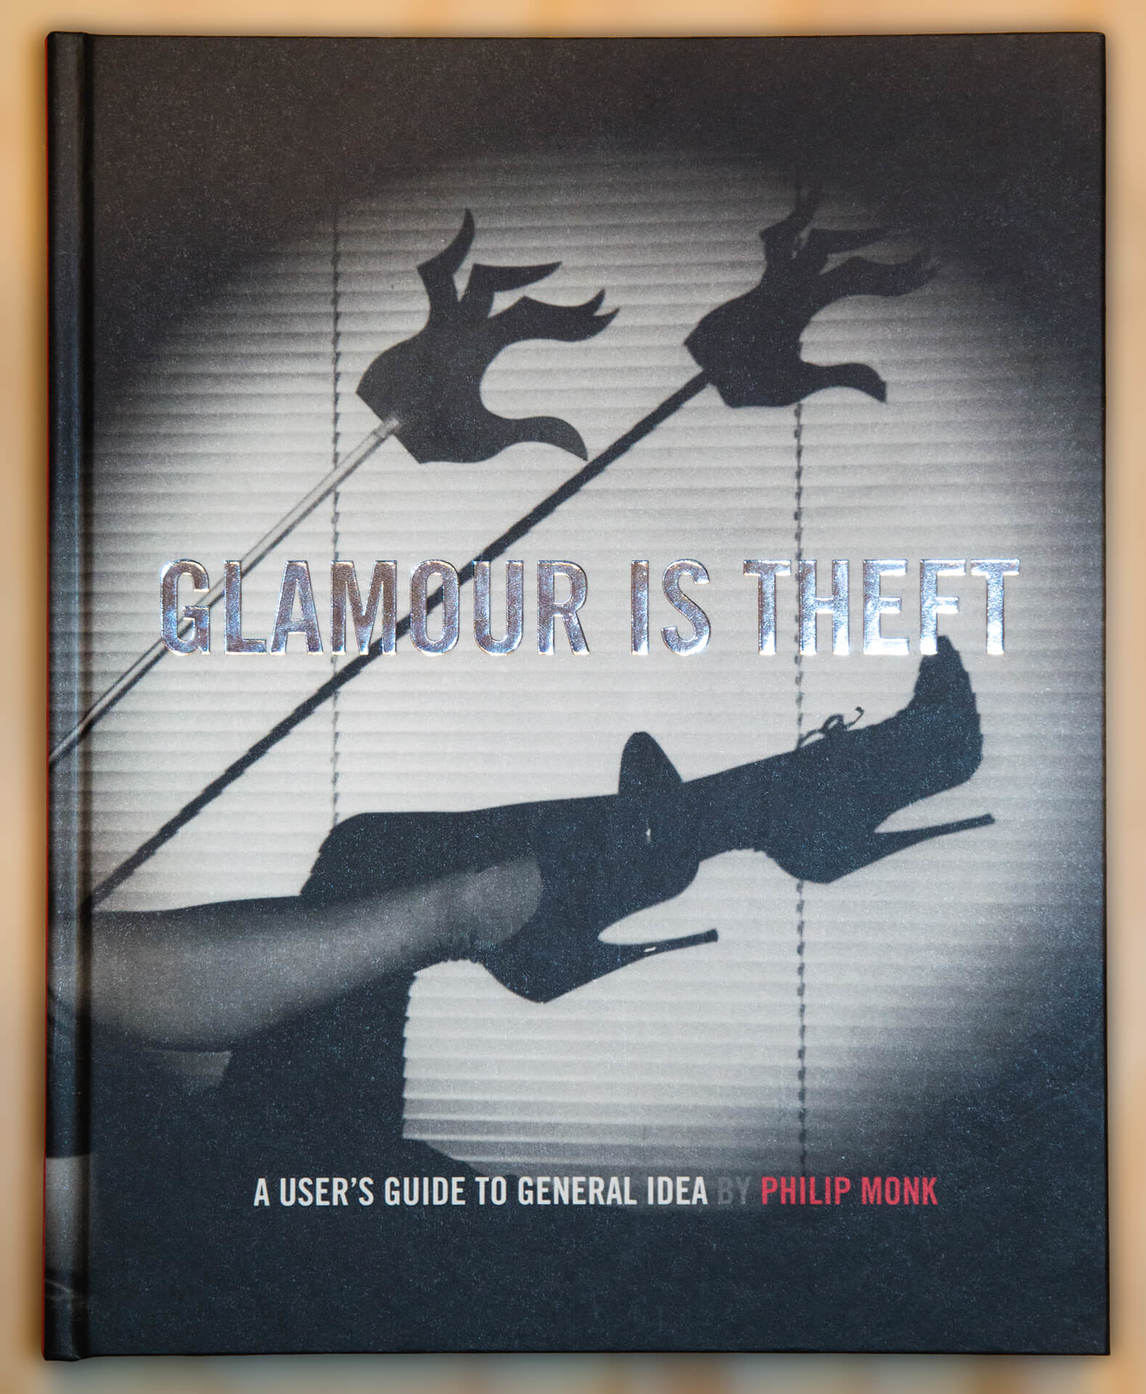 Art Canada Institute, Cover of Glamour is Theft: A User’s Guide to General Idea by Philip Monk